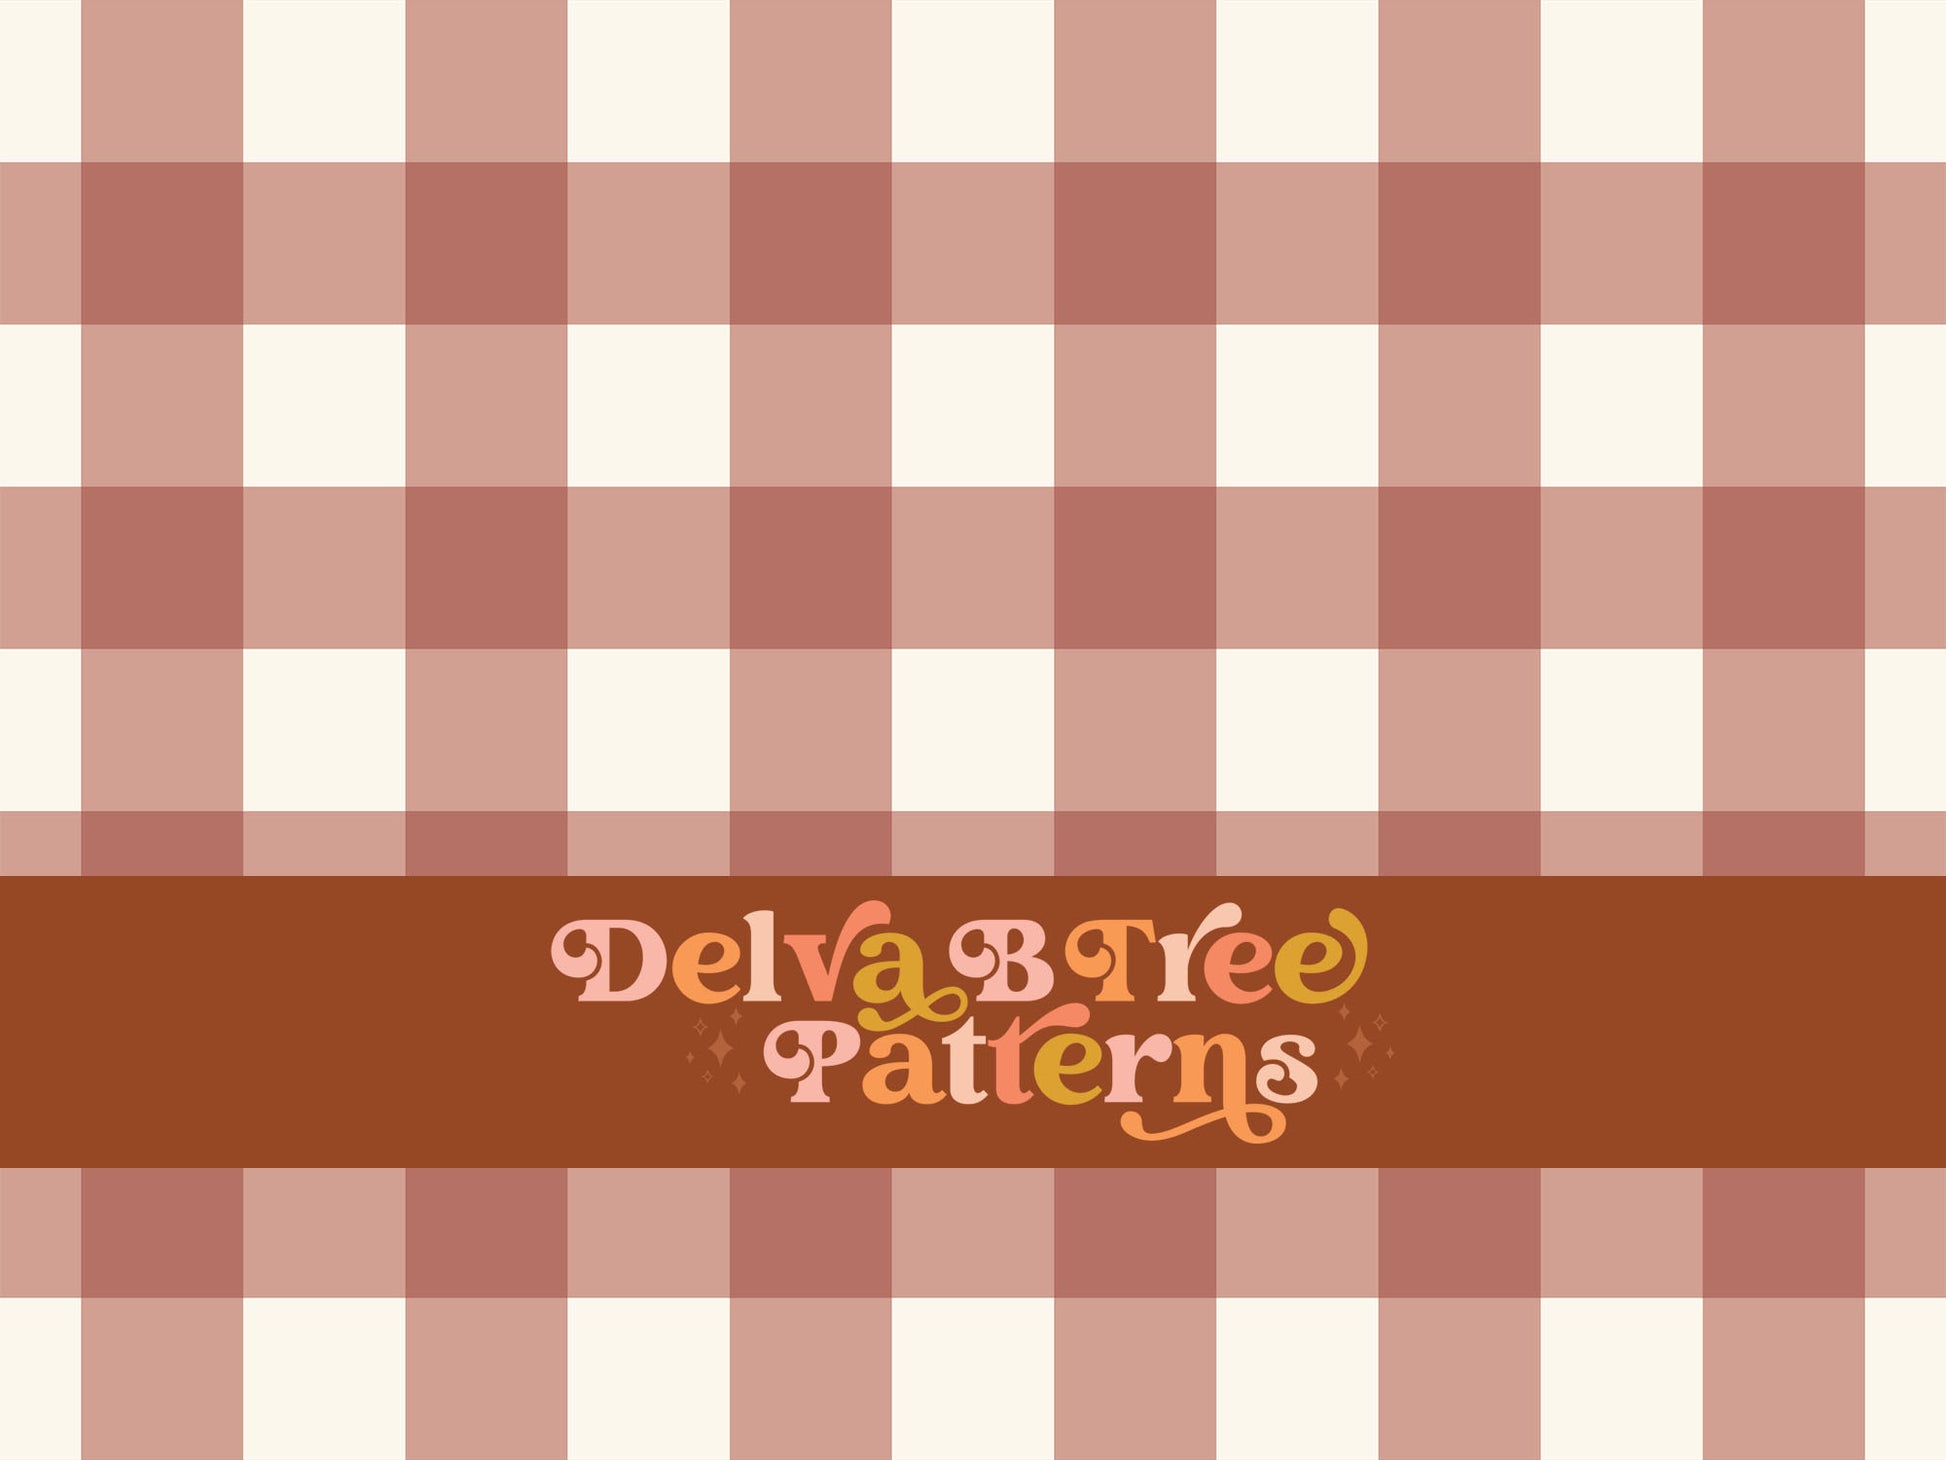 One inch dusty rose and off white gingham seamless file for fabric printing. Classic Buffalo Checked Repeat Pattern for textiles, polymailers, baby boy lovey blankets, nursery crib bedding, kids clothing, girls hair accessories, home decor accents, pet products.